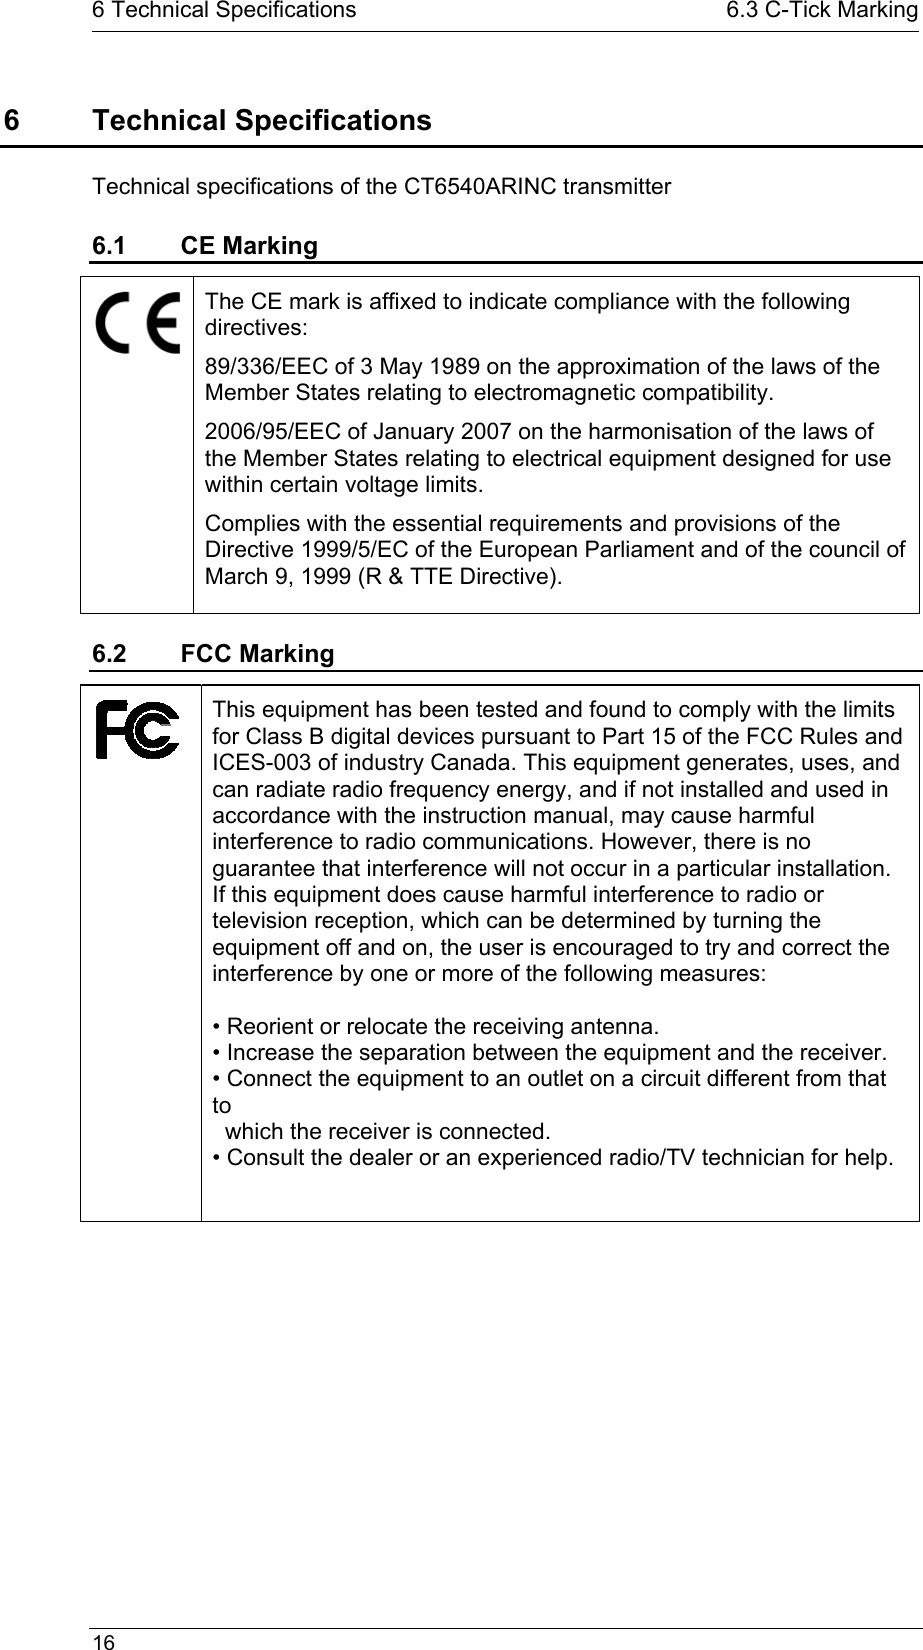   16  6 Technical Specifications  6.3 C-Tick Marking6 Technical Specifications Technical specifications of the CT6540ARINC transmitter 6.1 CE Marking  The CE mark is affixed to indicate compliance with the following directives:  89/336/EEC of 3 May 1989 on the approximation of the laws of the Member States relating to electromagnetic compatibility. 2006/95/EEC of January 2007 on the harmonisation of the laws of the Member States relating to electrical equipment designed for use within certain voltage limits. Complies with the essential requirements and provisions of the Directive 1999/5/EC of the European Parliament and of the council of March 9, 1999 (R &amp; TTE Directive). 6.2 FCC Marking  This equipment has been tested and found to comply with the limits for Class B digital devices pursuant to Part 15 of the FCC Rules and ICES-003 of industry Canada. This equipment generates, uses, and can radiate radio frequency energy, and if not installed and used in accordance with the instruction manual, may cause harmful interference to radio communications. However, there is no guarantee that interference will not occur in a particular installation. If this equipment does cause harmful interference to radio or television reception, which can be determined by turning the equipment off and on, the user is encouraged to try and correct the interference by one or more of the following measures:  • Reorient or relocate the receiving antenna. • Increase the separation between the equipment and the receiver. • Connect the equipment to an outlet on a circuit different from that to    which the receiver is connected. • Consult the dealer or an experienced radio/TV technician for help.  